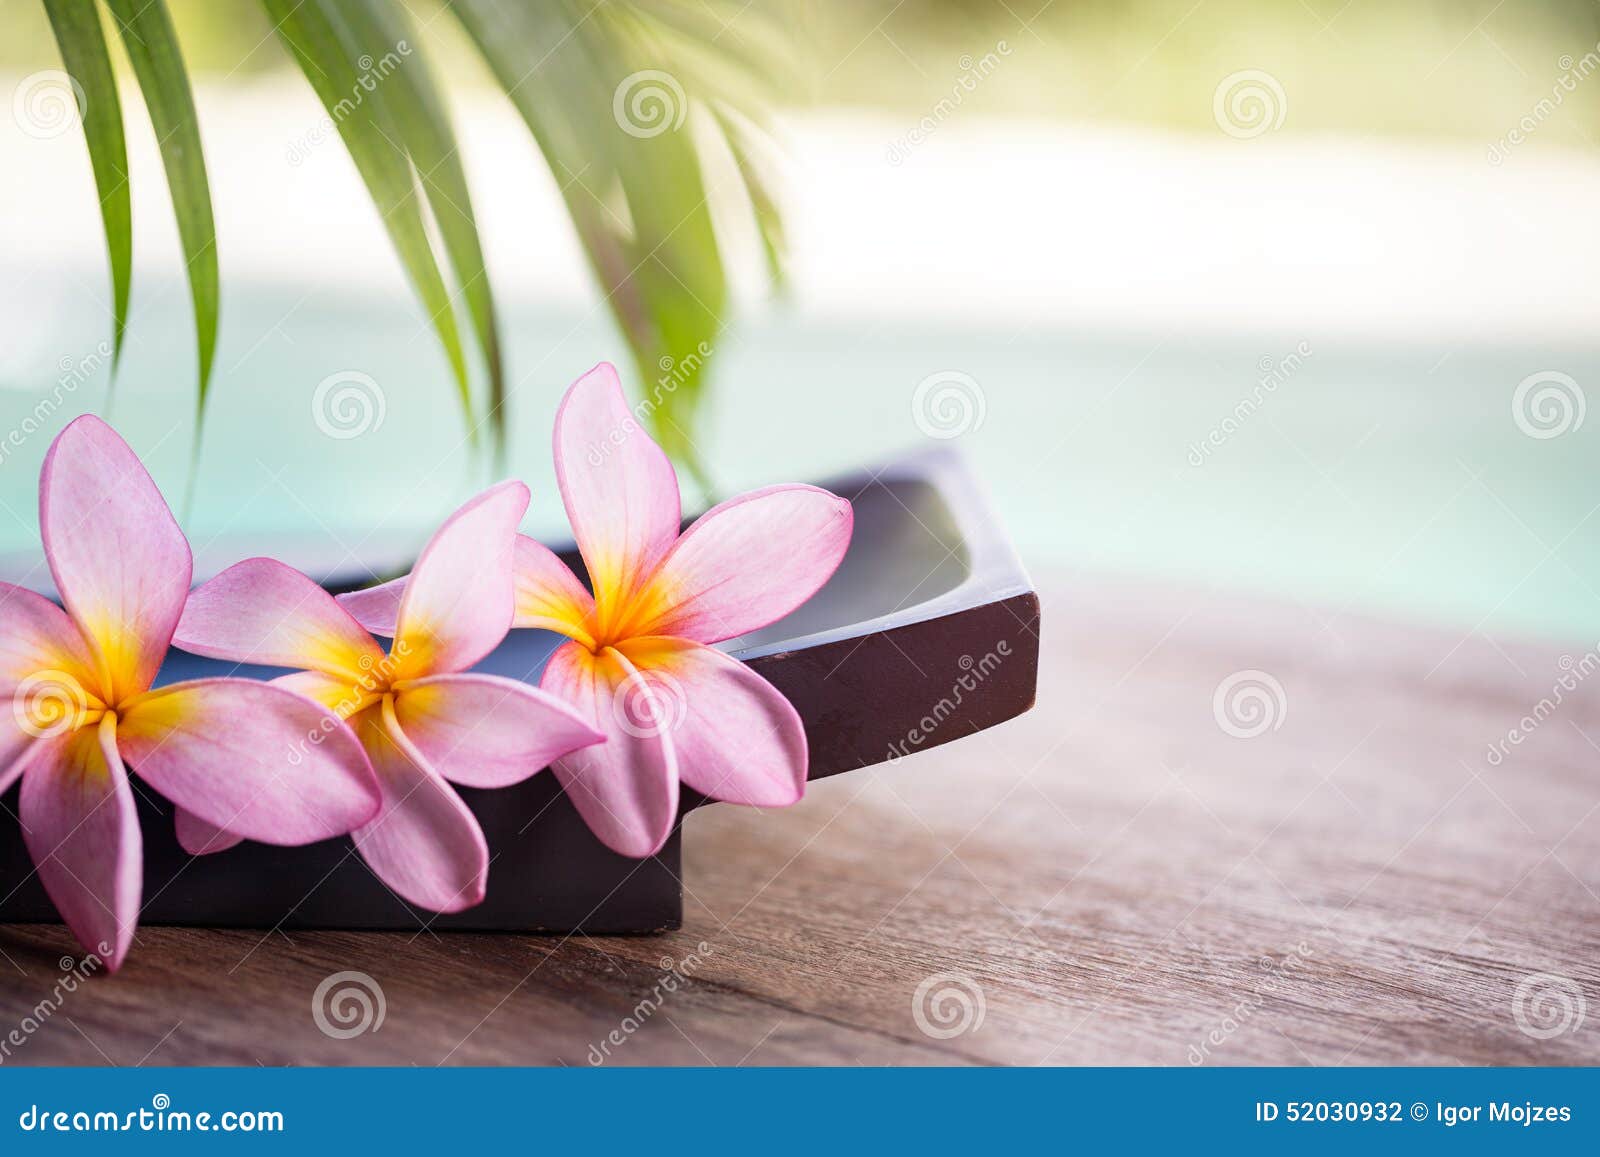 spa and wellness background